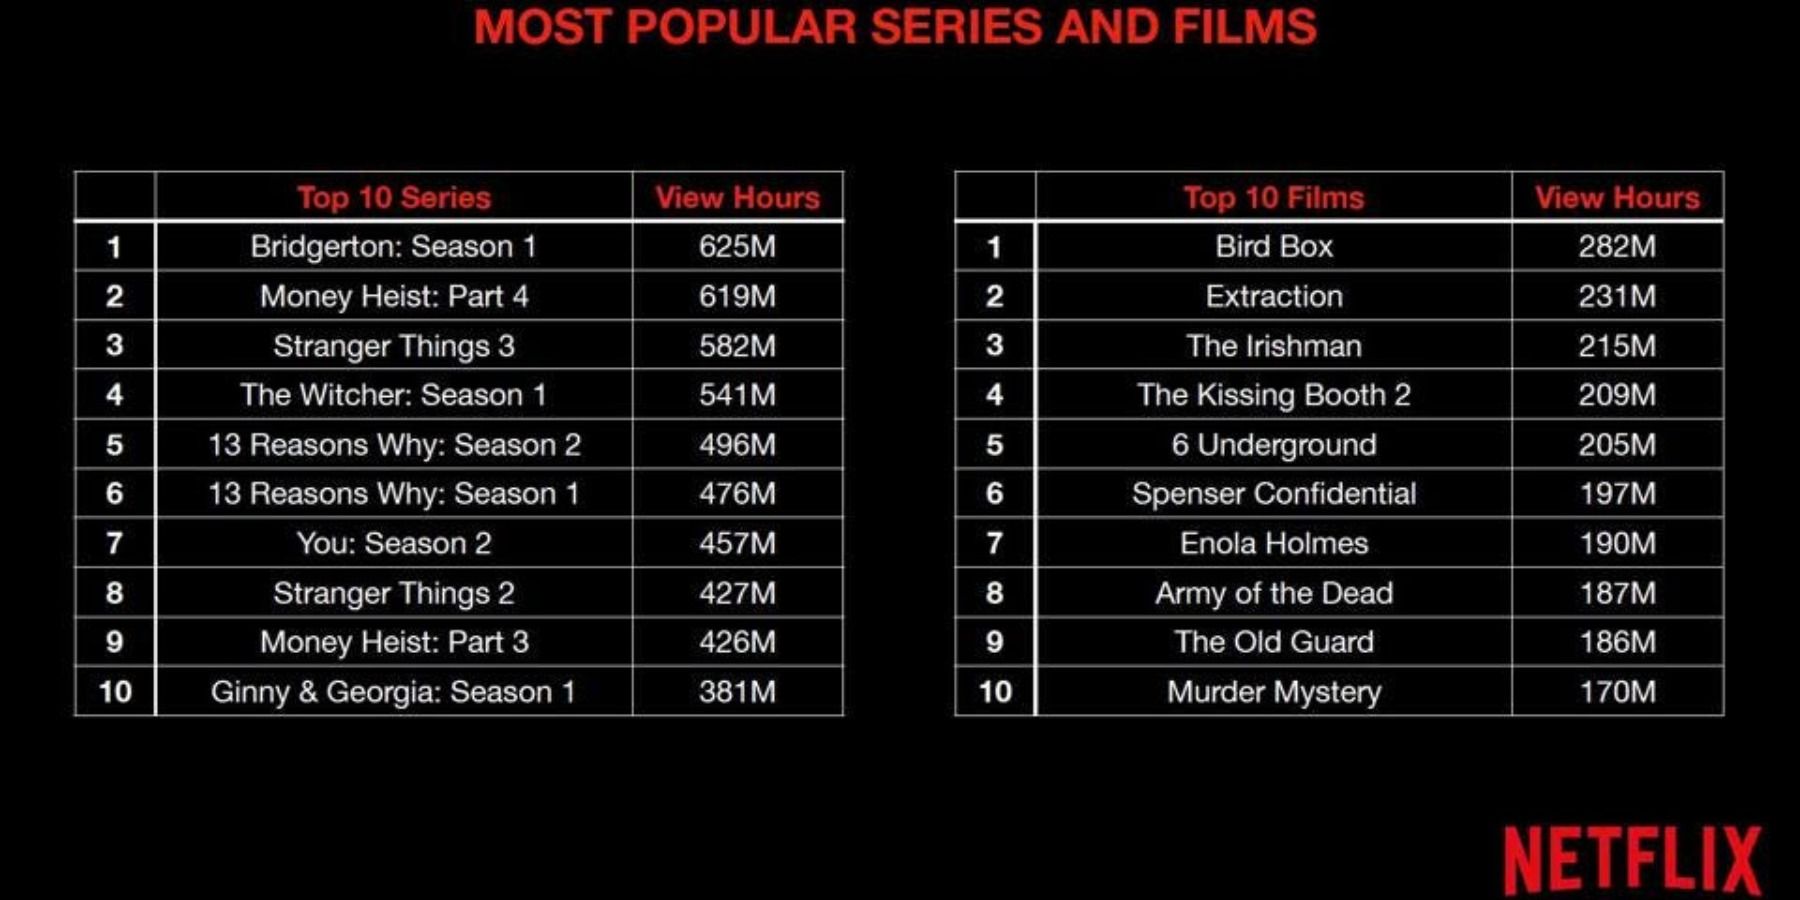 Netflix most watched content